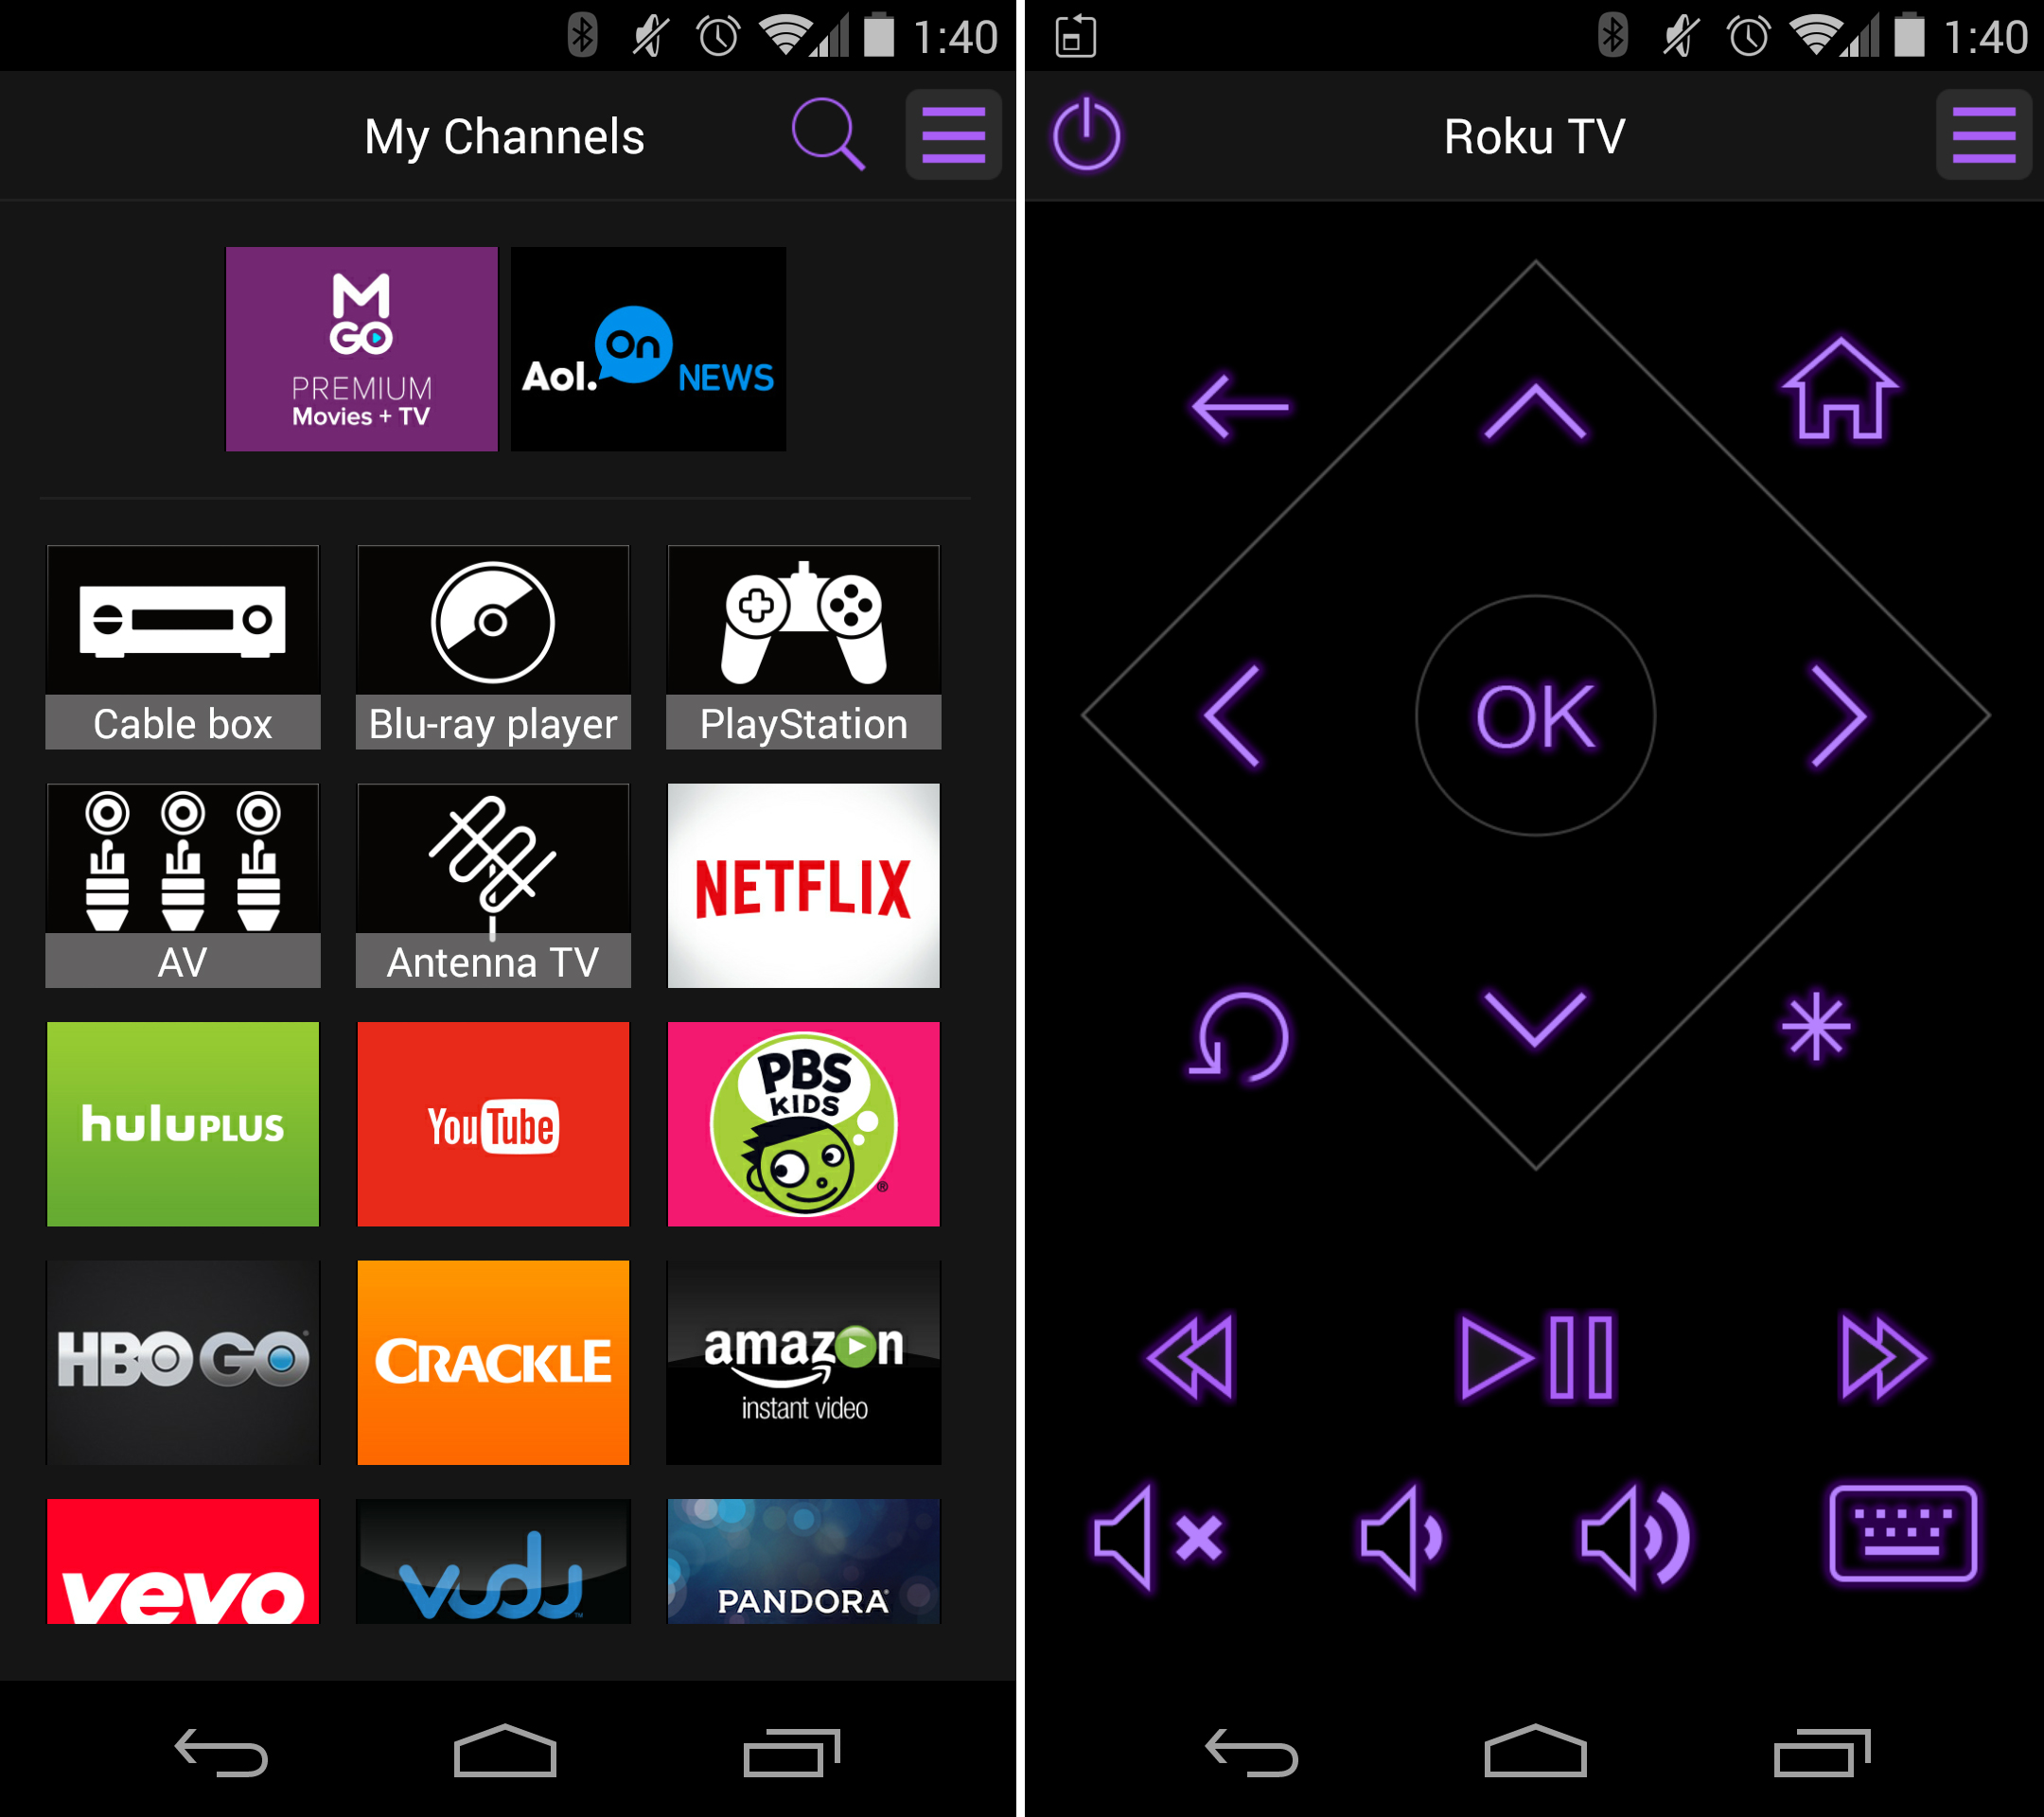 Control Roku TV with the free Roku mobile app for Android, iOS and ...